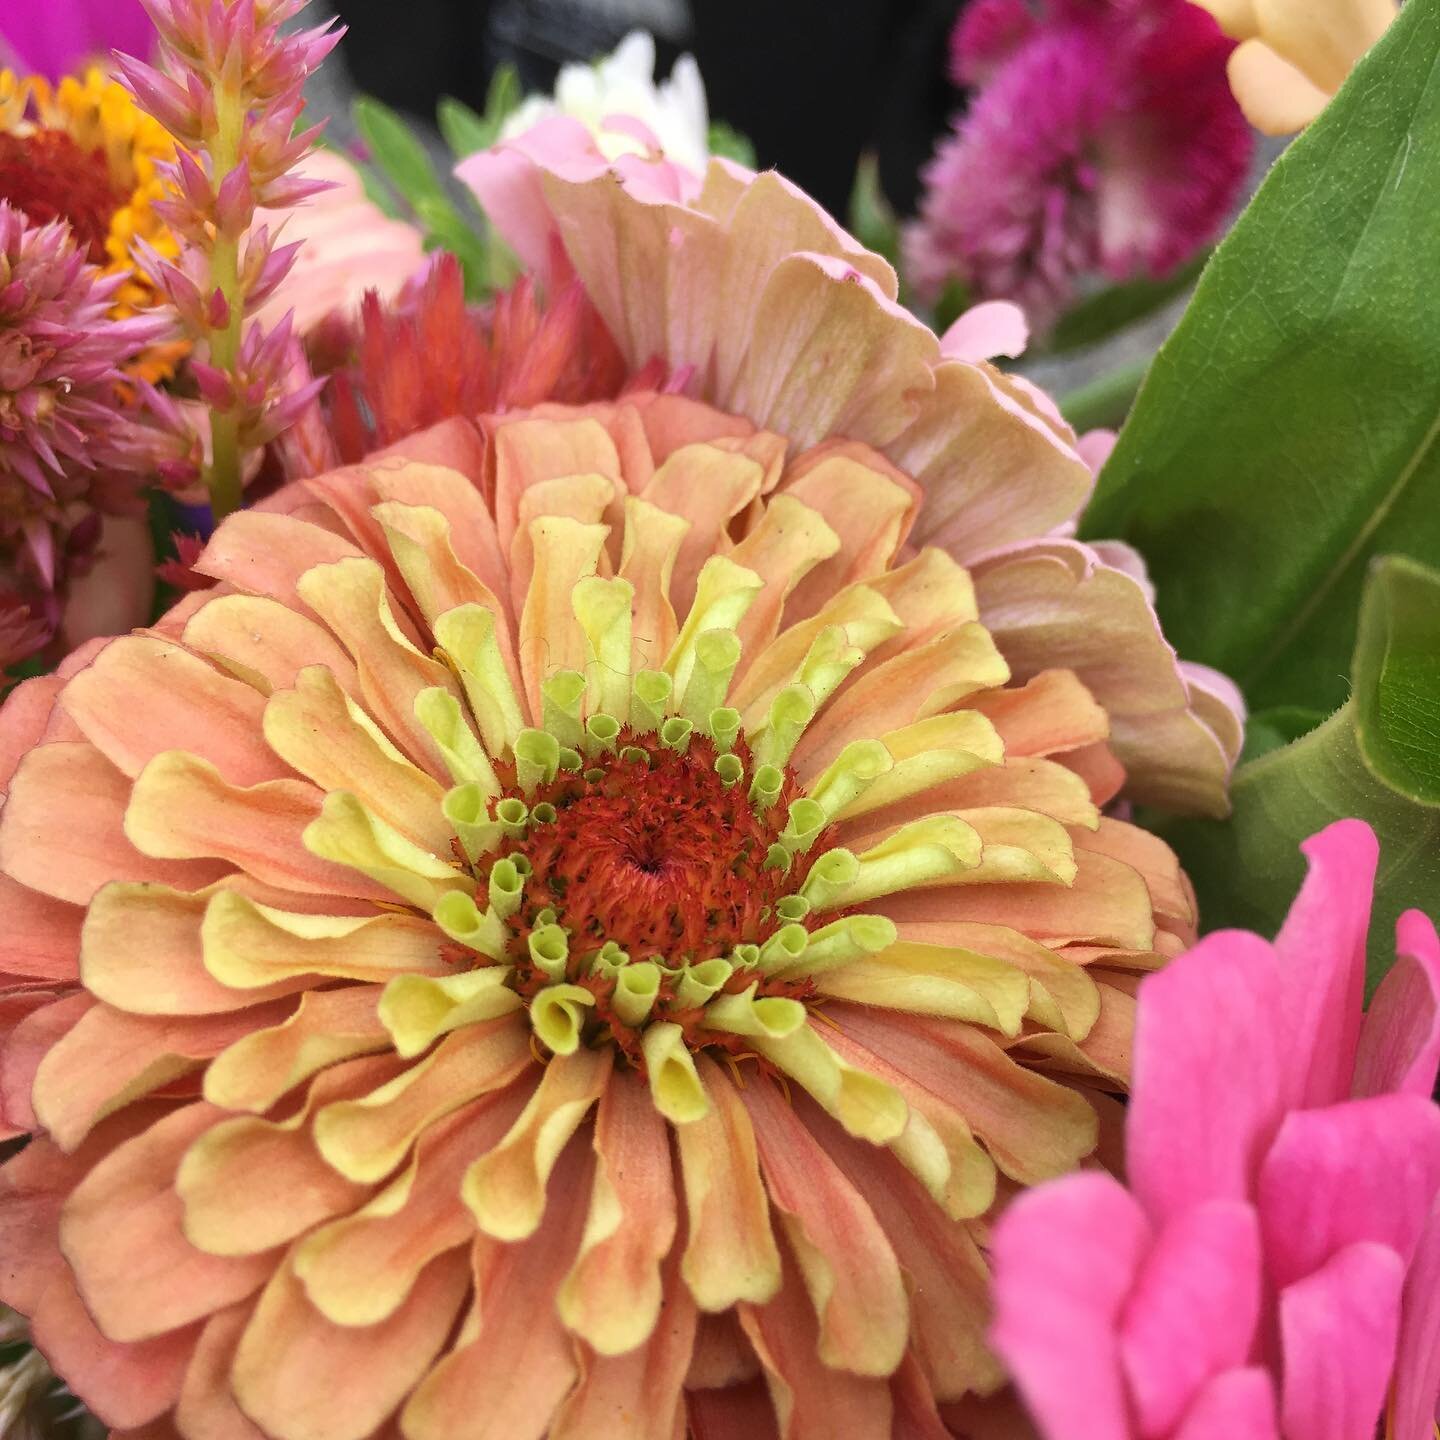 Our first-ever flower share starts next week! The bouquets will change from week to week depending on what&rsquo;s in bloom but your farmers are growing zinnias, cosmos, sunflowers, gomphrena, celosia and more! If you&rsquo;re signed up for flowers y